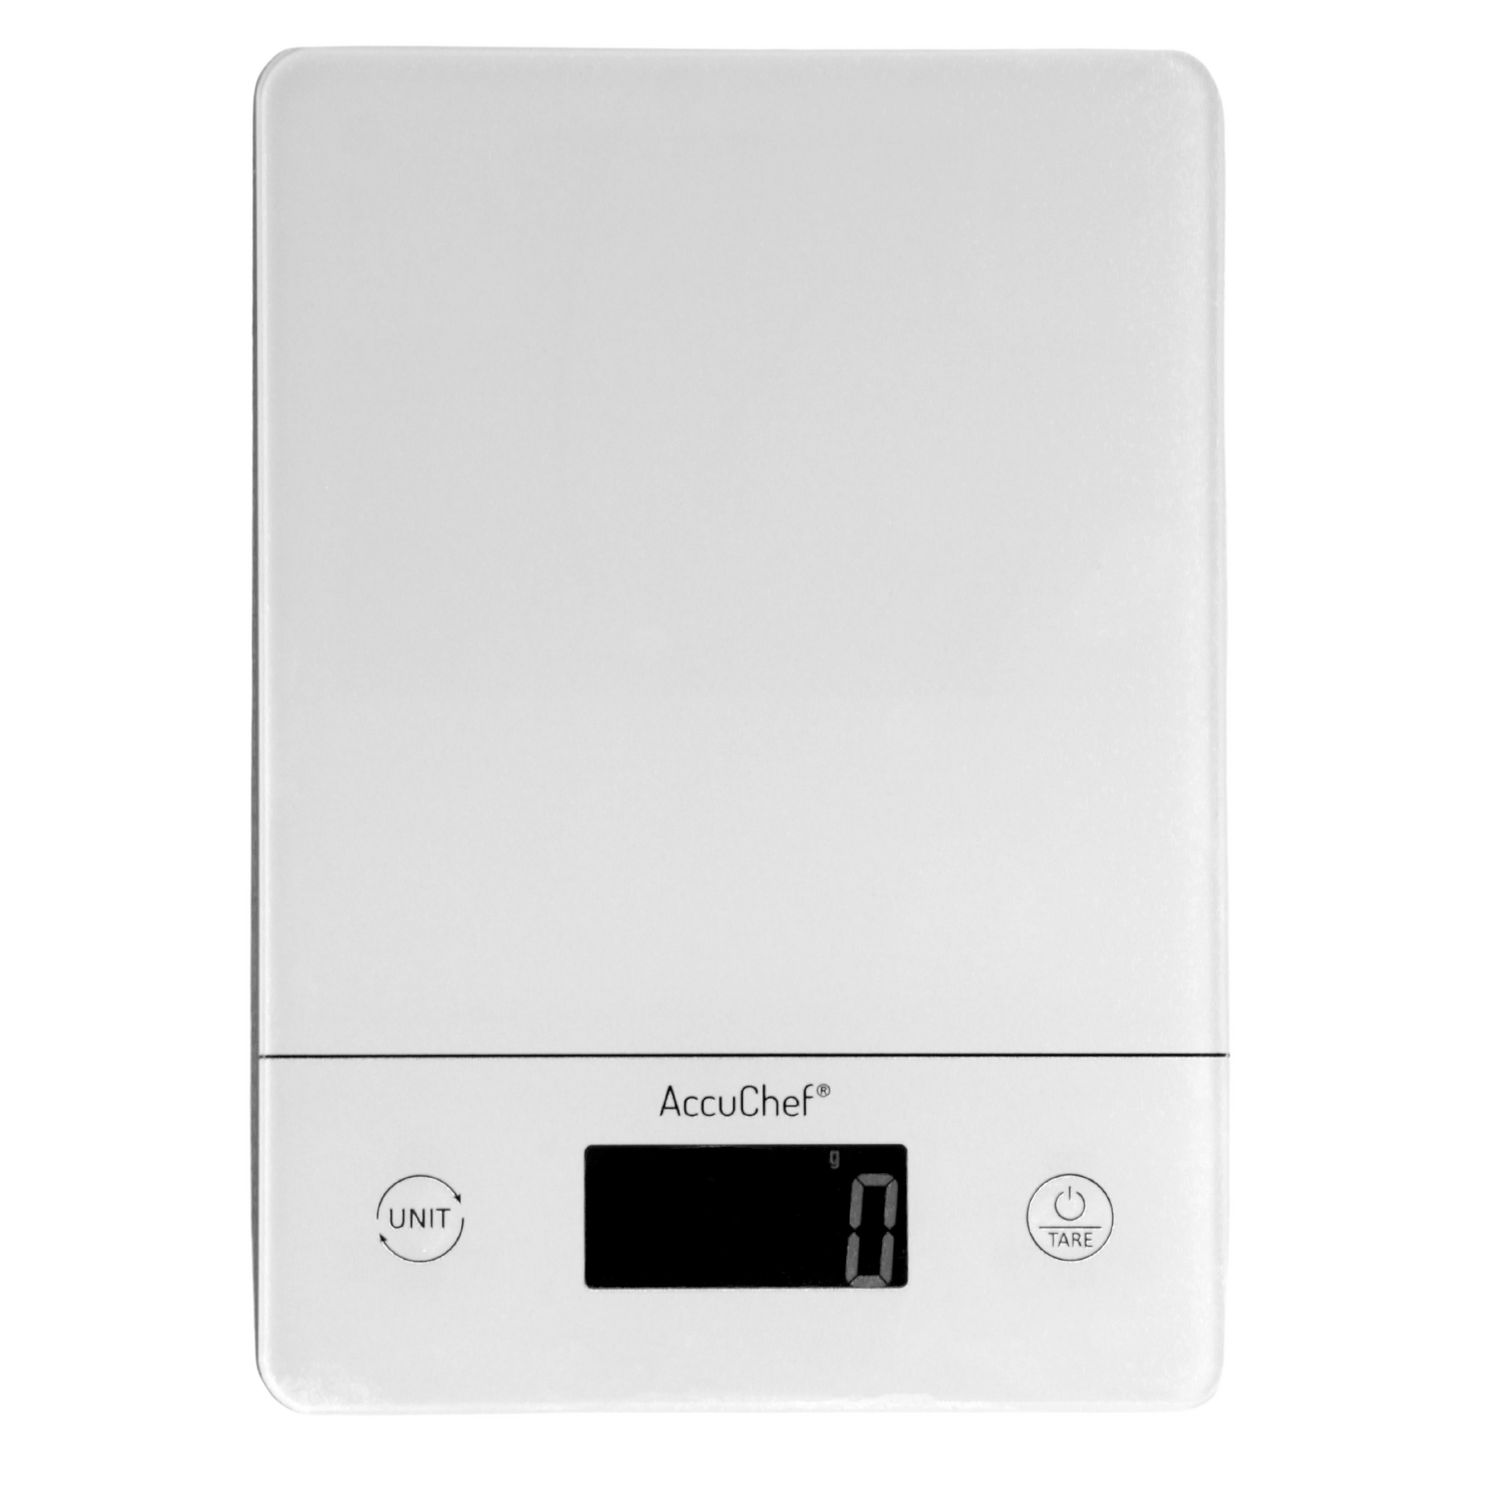 AccuChef Digital Kitchen Scale with Tempered Glass Platform, White, Model  2315, 11lb (5kg) Capacity 